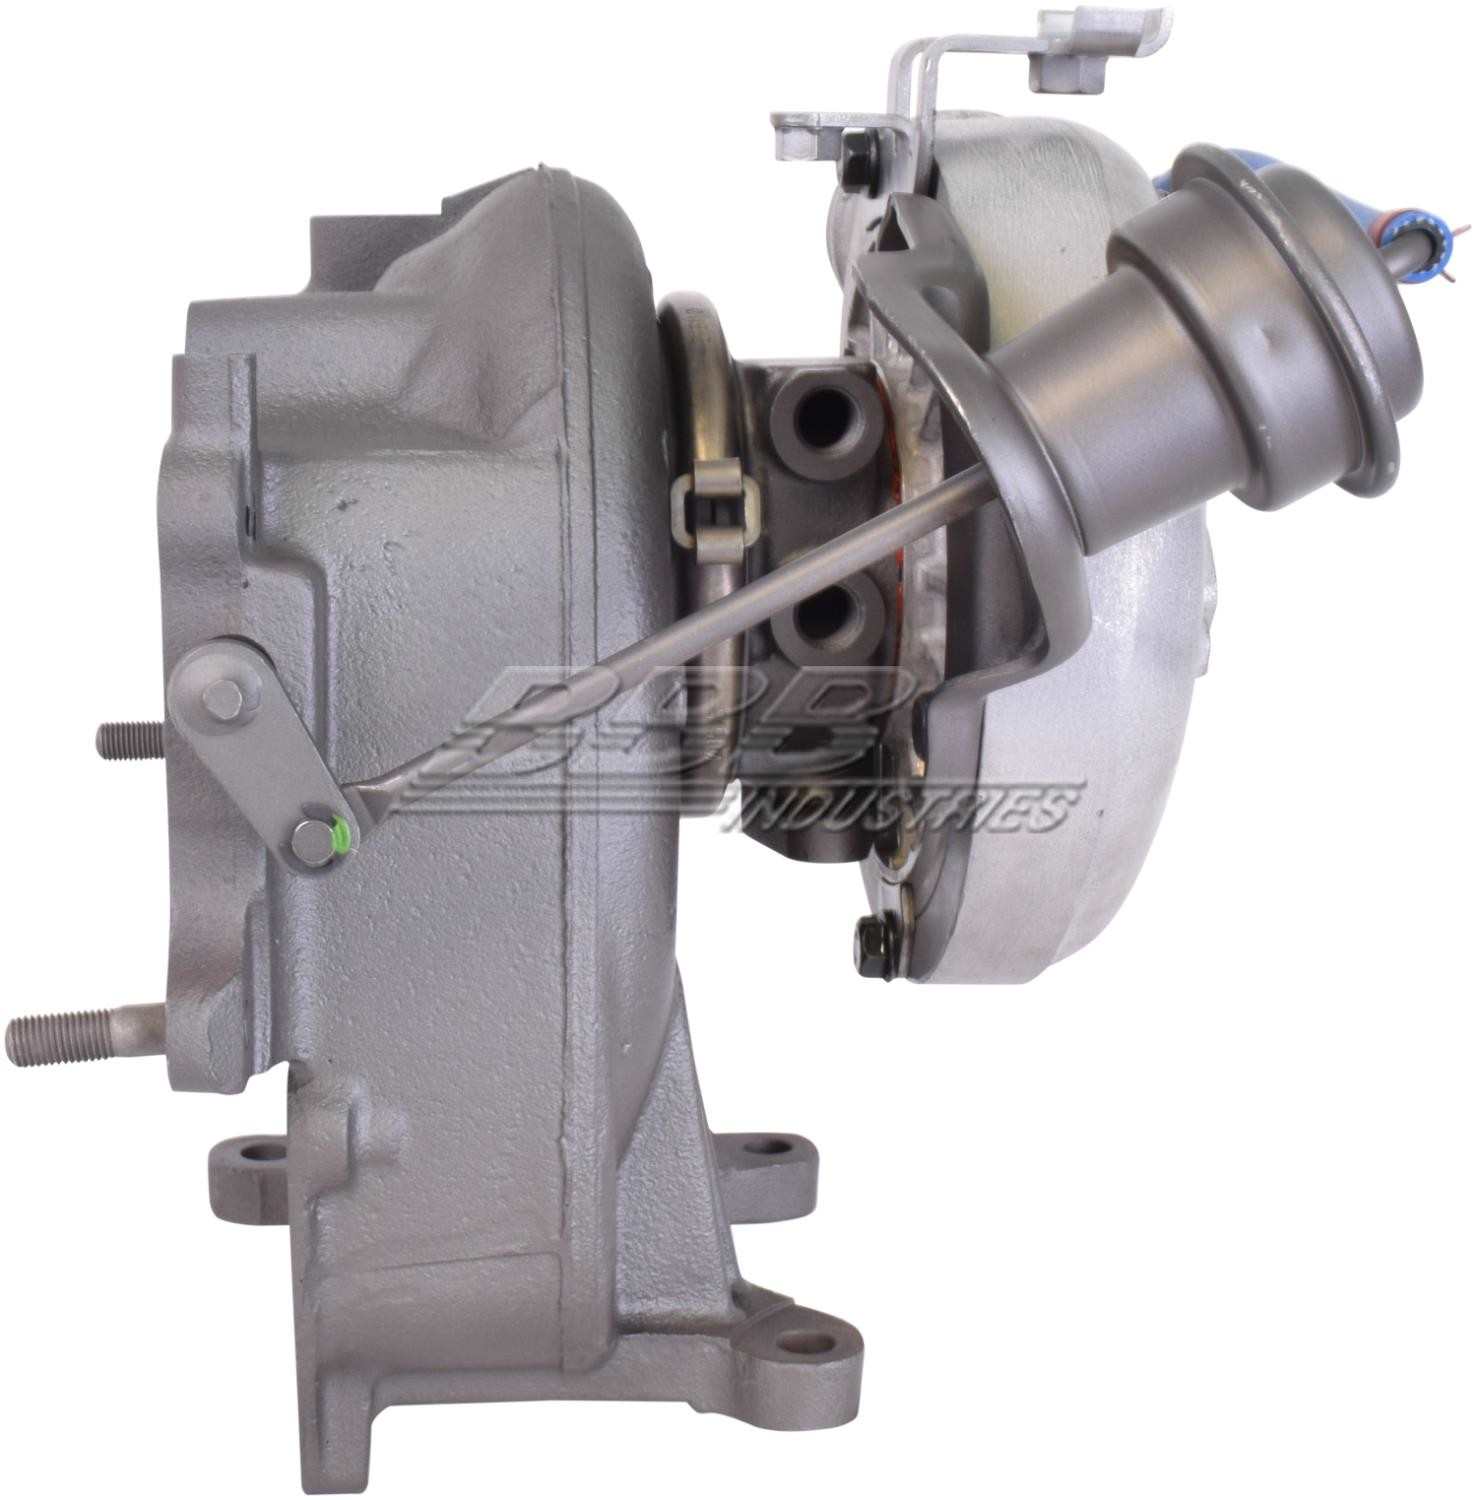 OE-TurboPower Remanufactured Turbocharger  top view frsport D3005